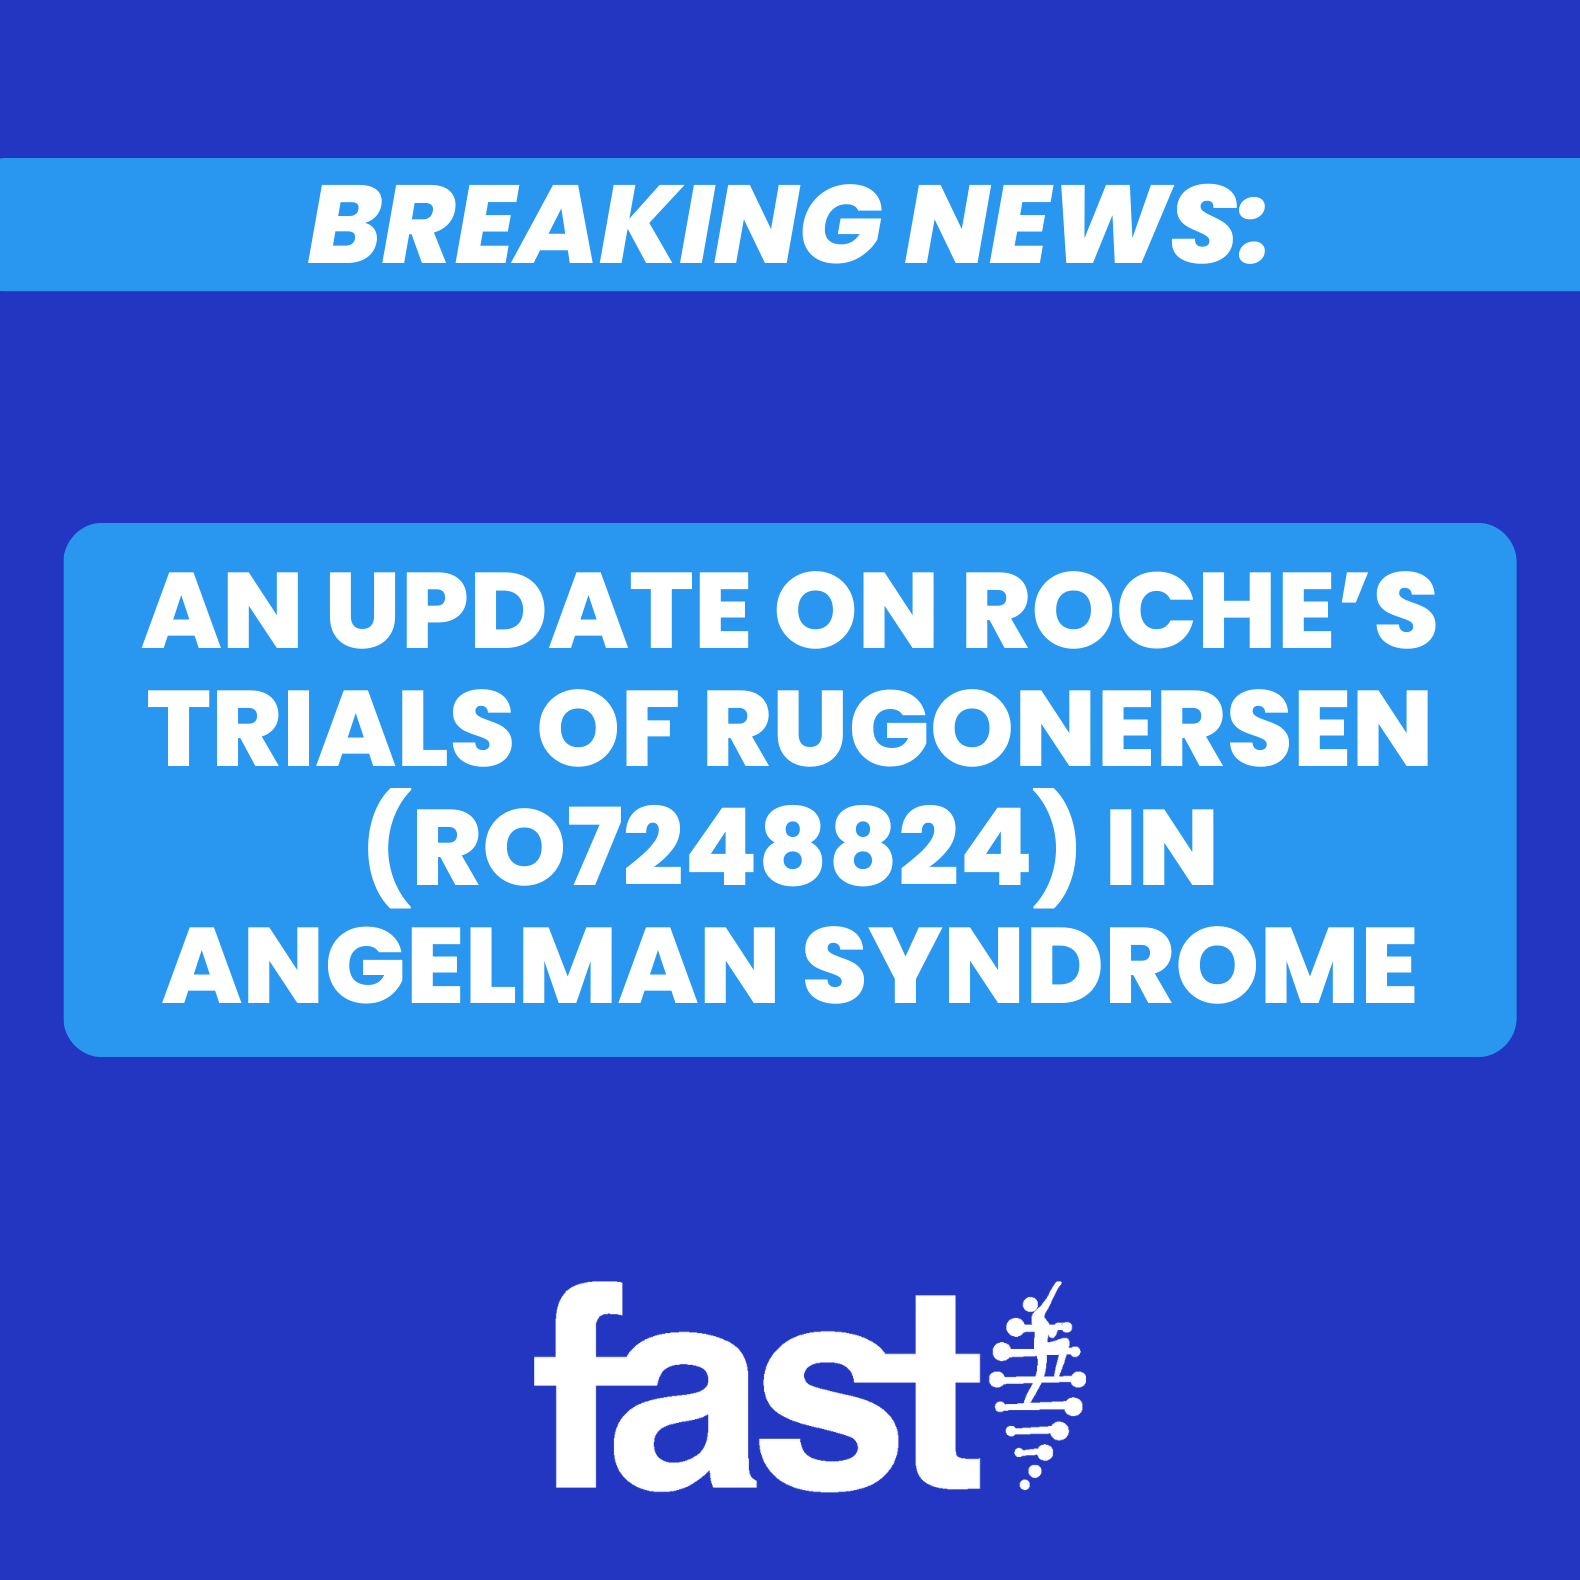 Breaking news: an update on Roche’s trials of rugonersen (RO7248824) in Angelman syndrome